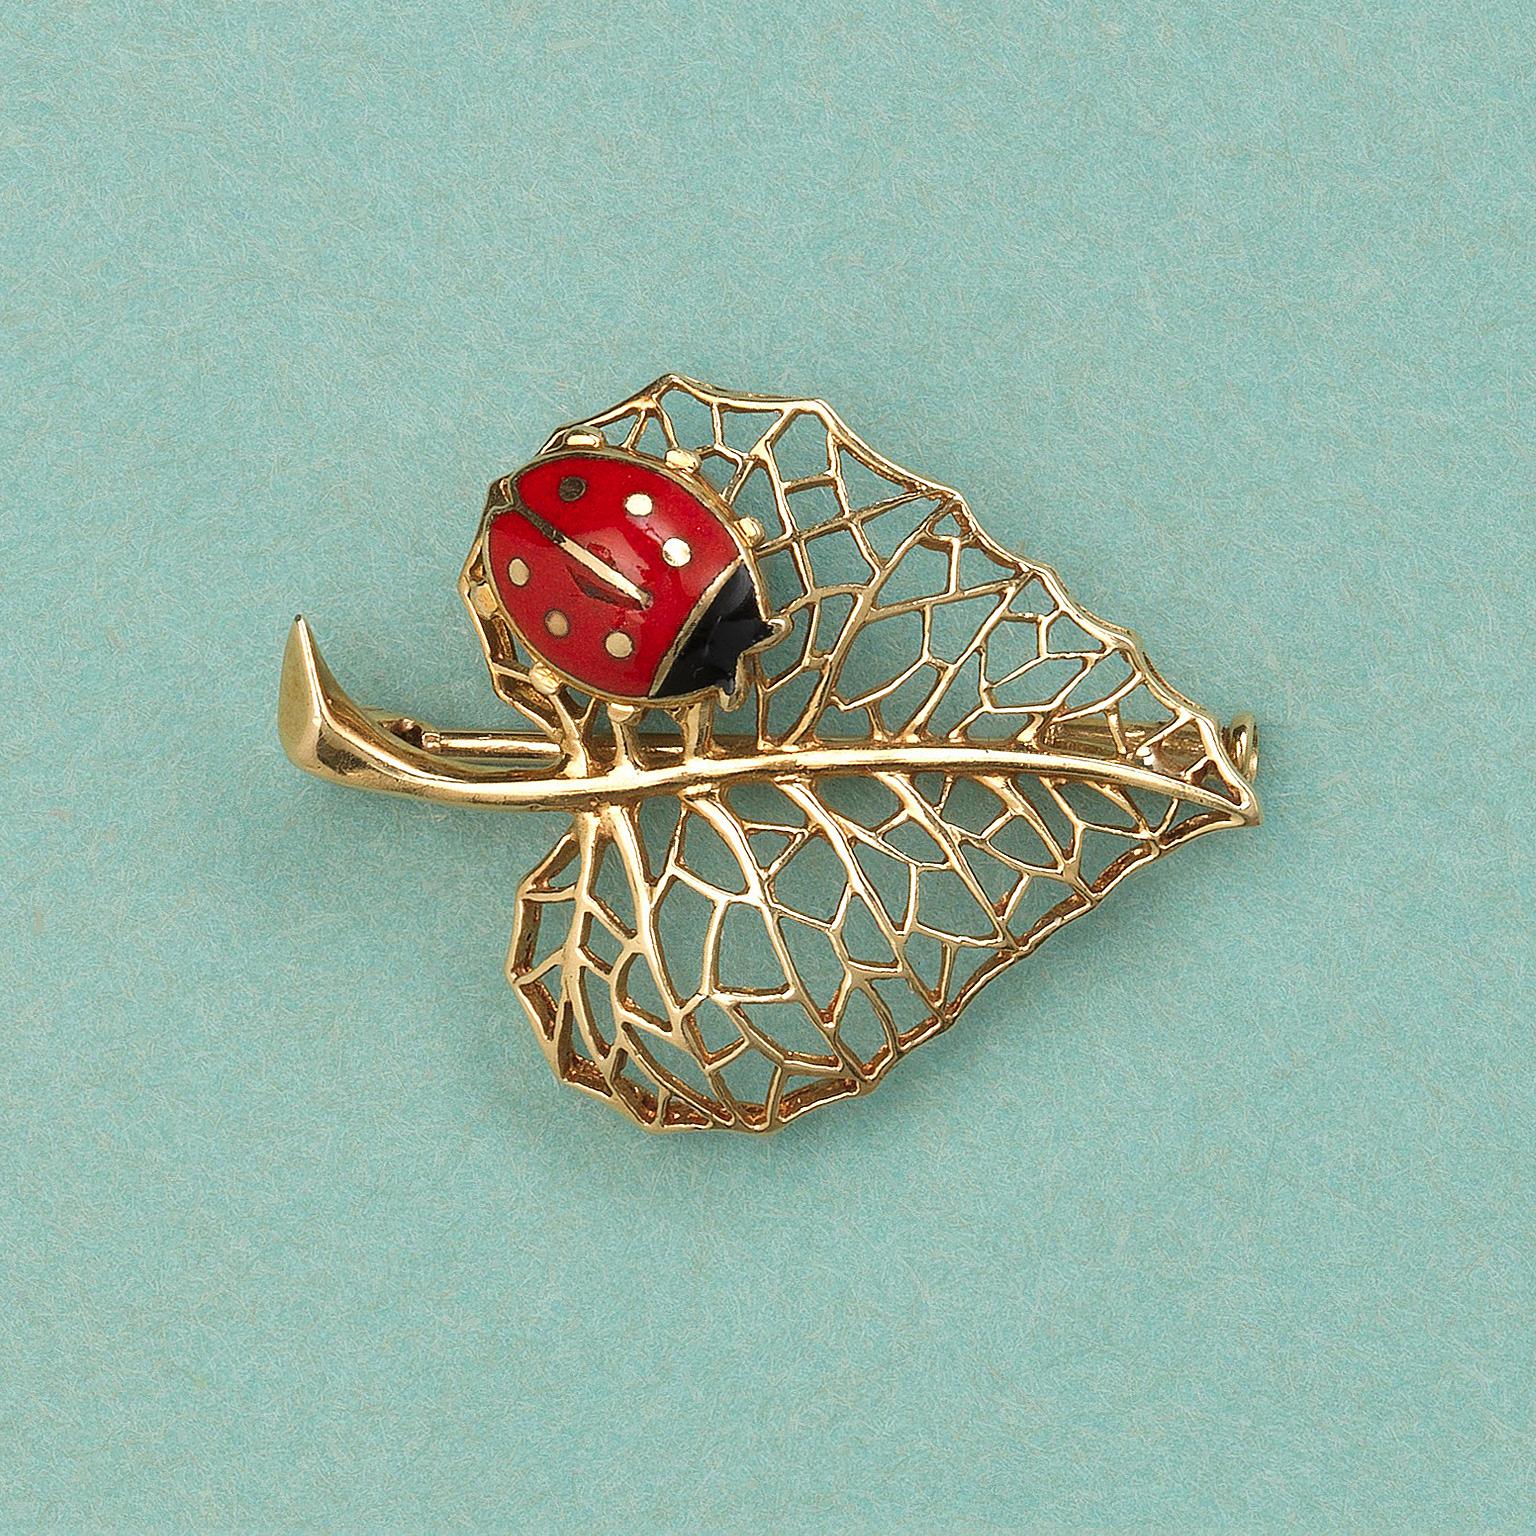 A darling 18 carat yellow gold leaf brooch with ajour gold veins and a small ladybird with black and red enamel, attributed Cartier and numbered: 020 456 with French marks.

weight: 4.53 gram
dimensions: 3.1 x 2.4 cm